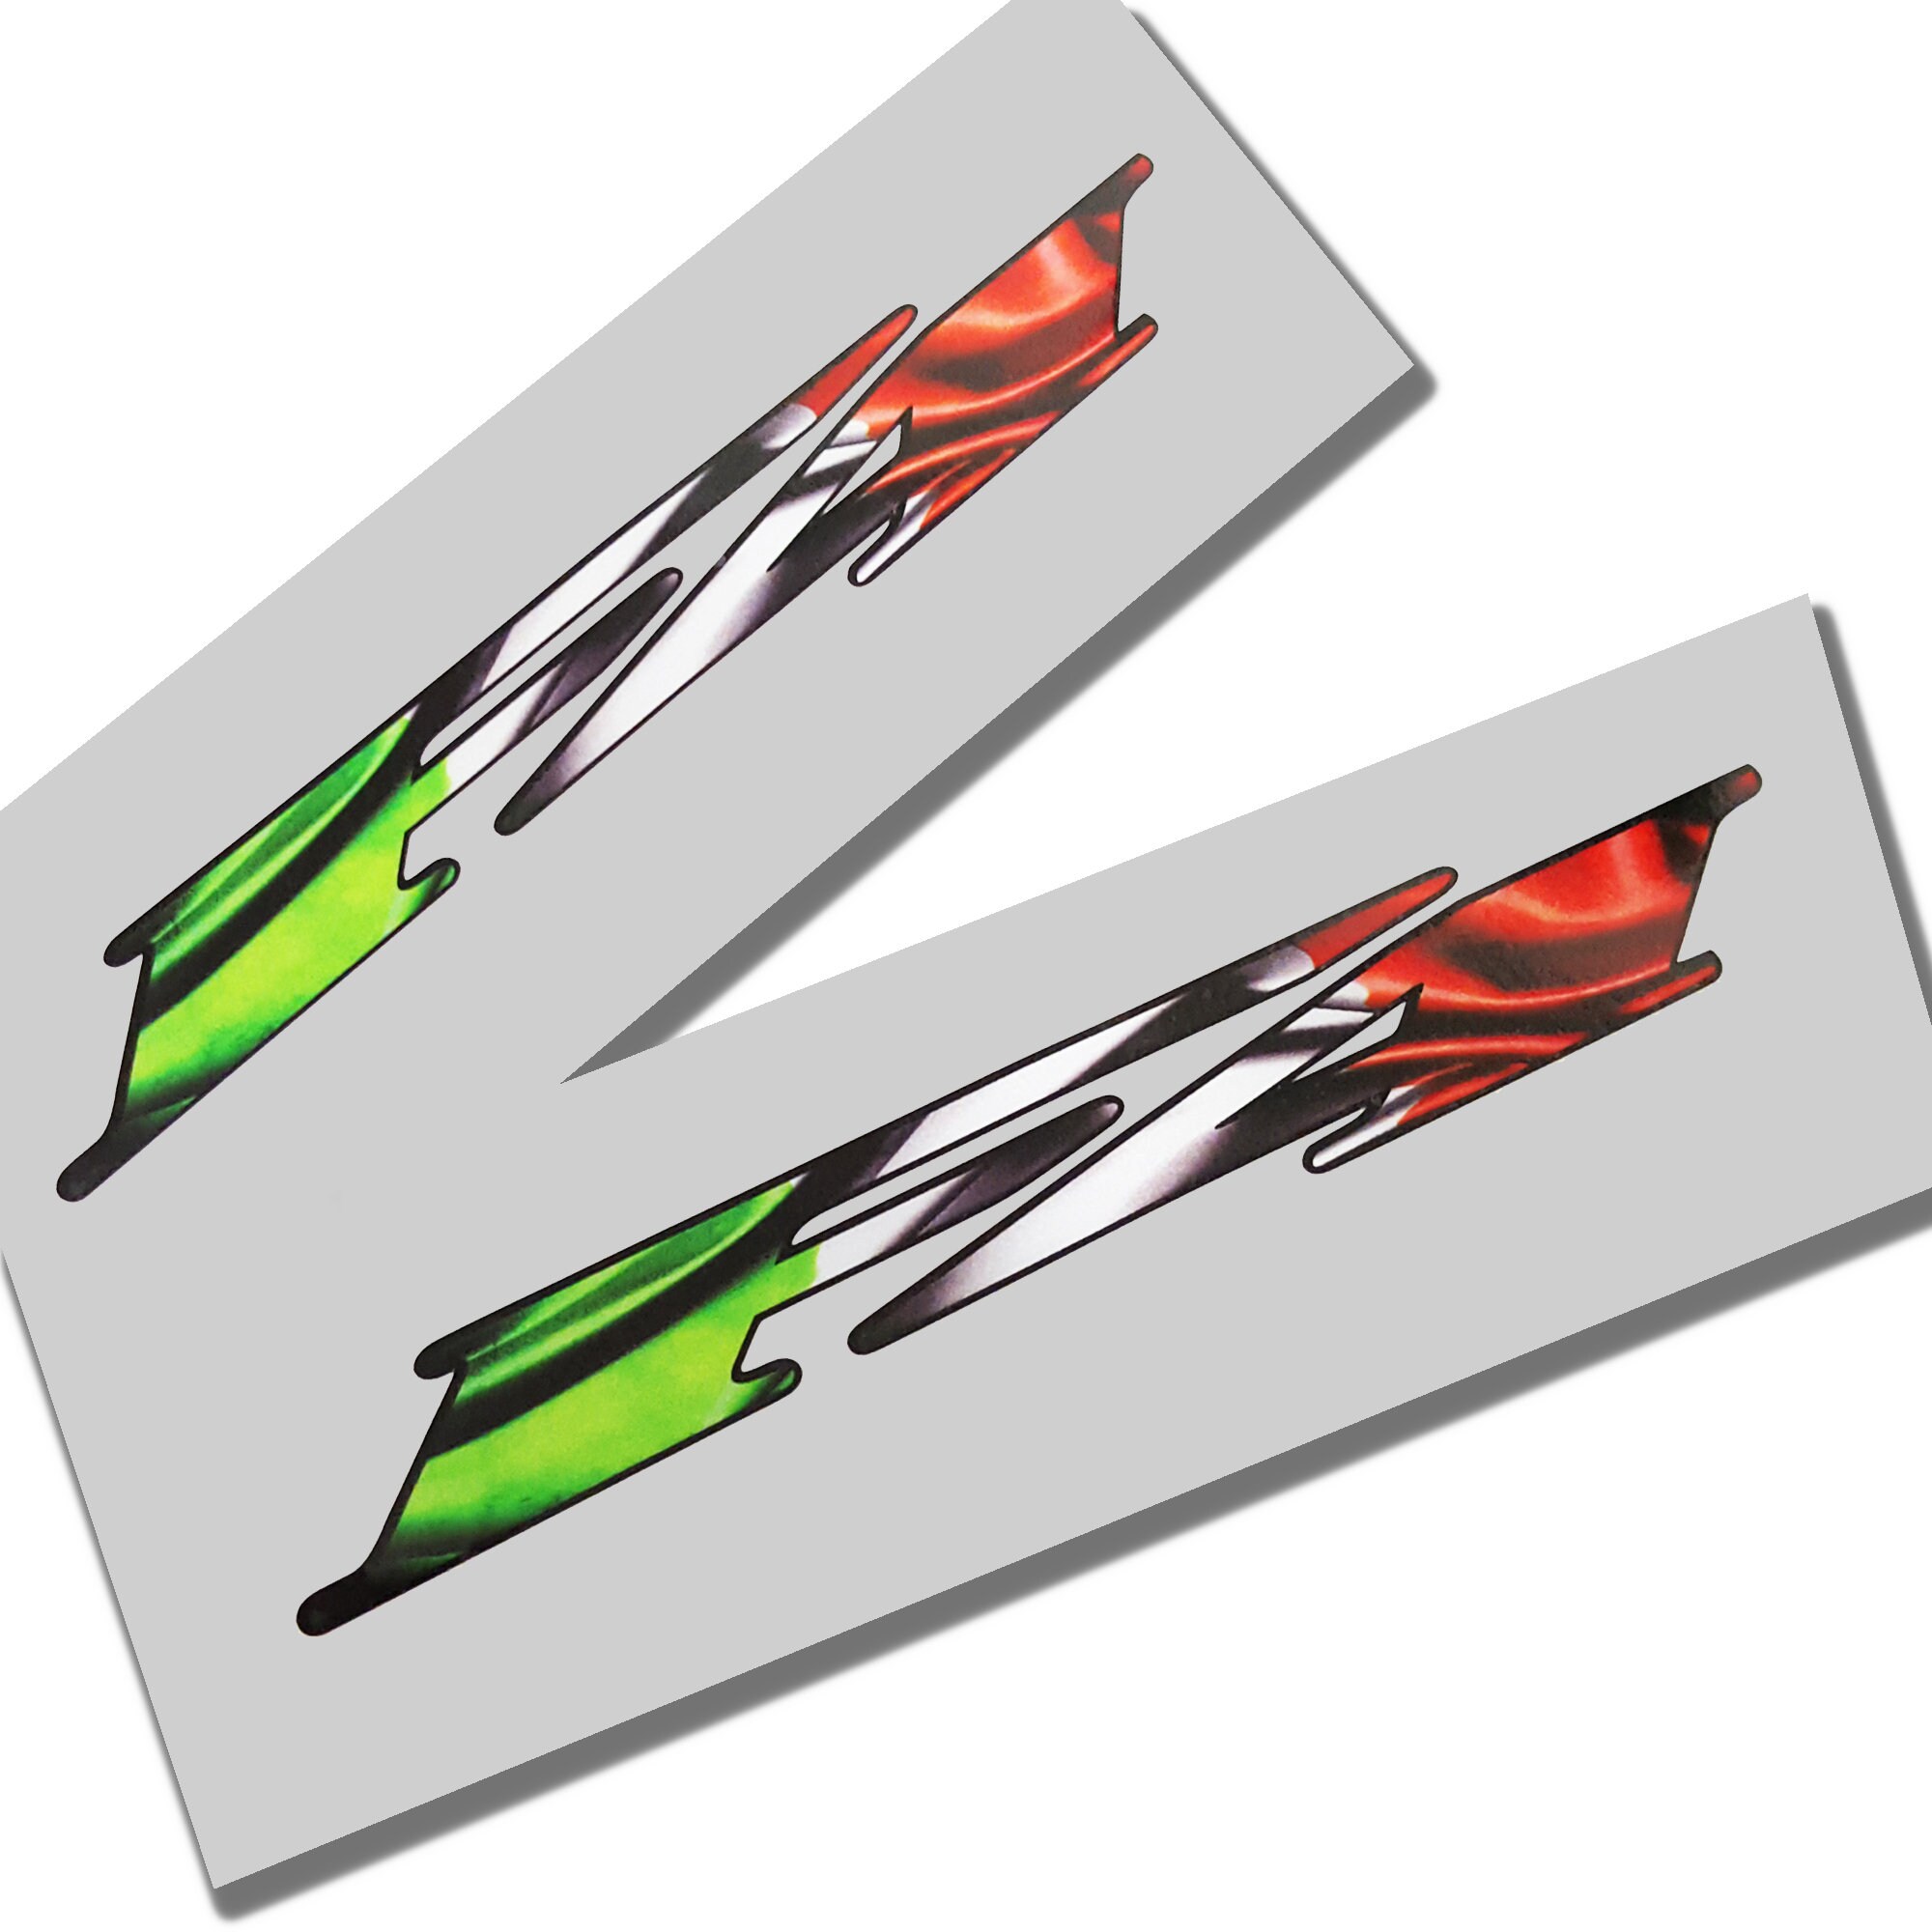 MV Agusta corse F4  Motorcycle decals graphics badge style design x 2 pieces. 